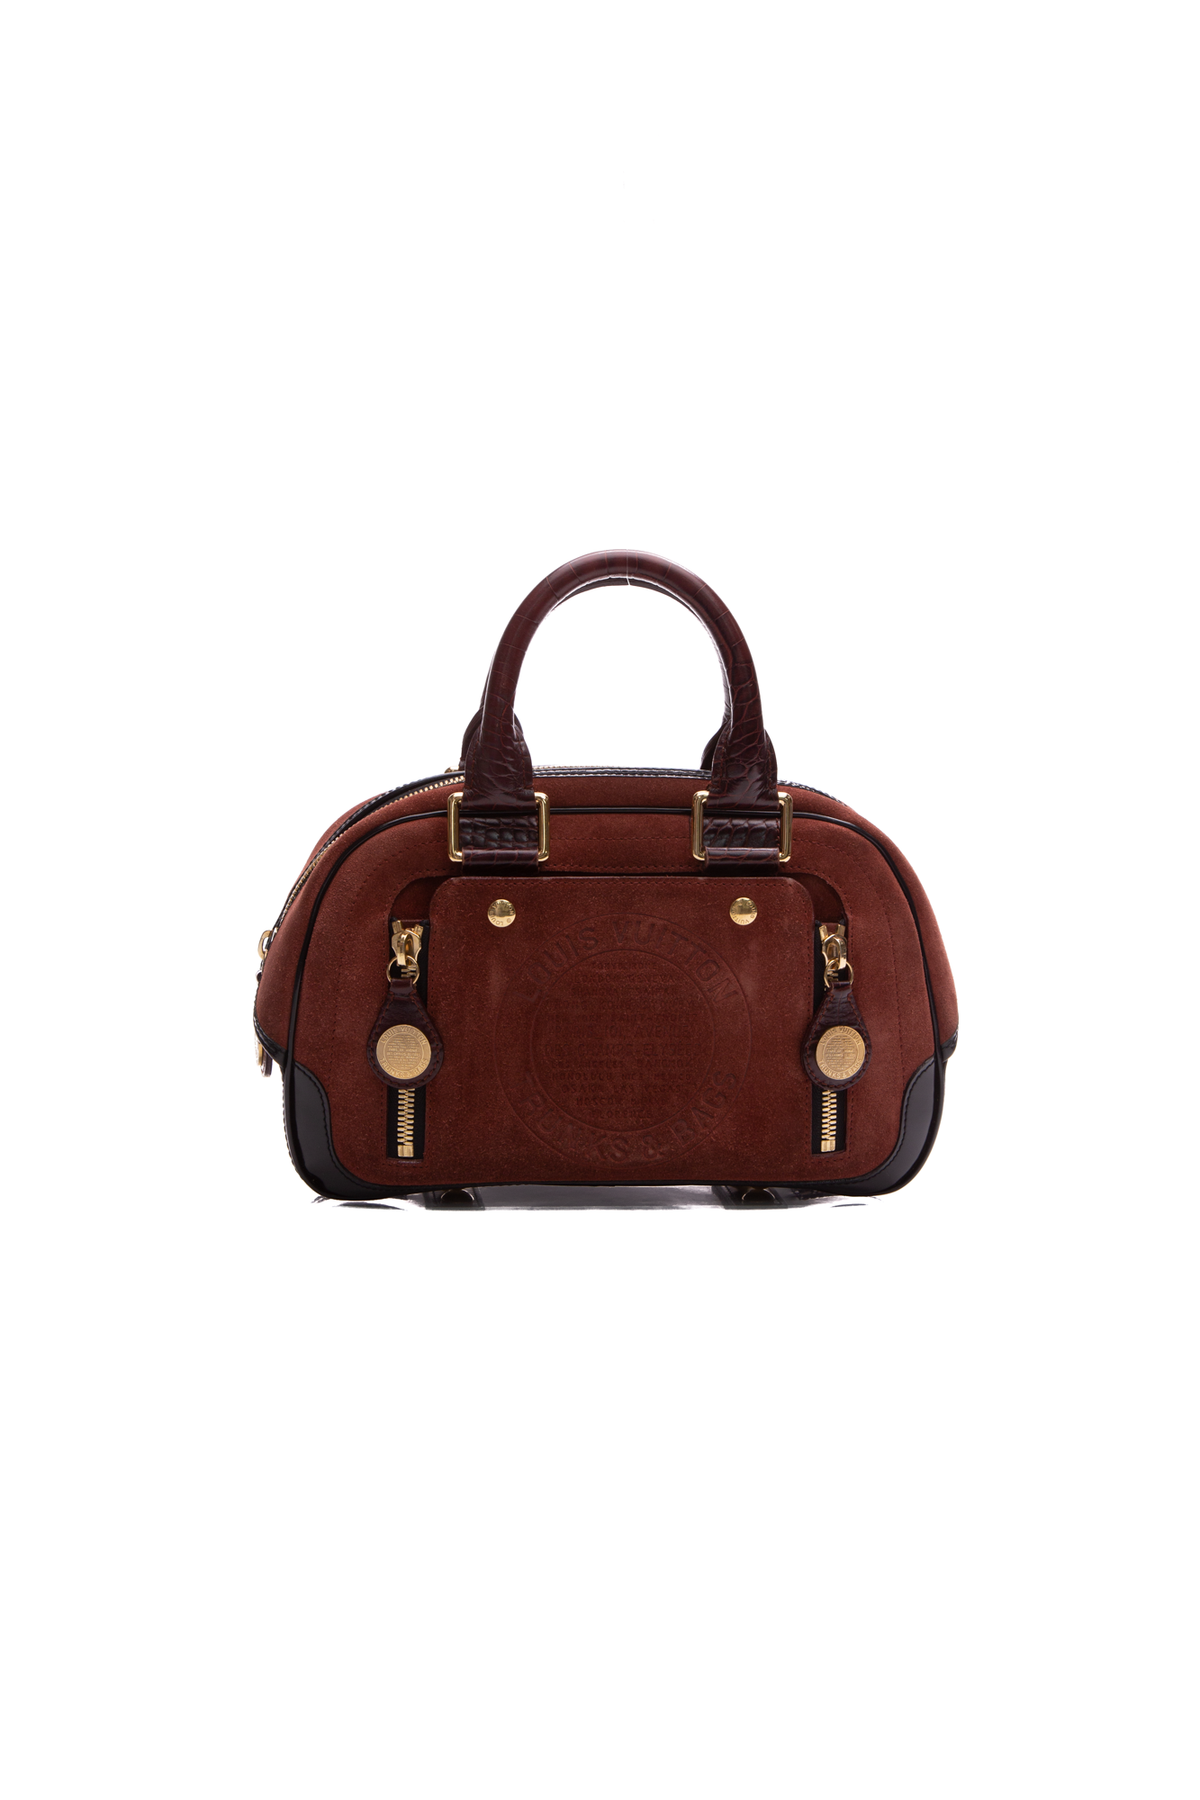 Louis Vuitton Havane Suede and Leather Stamped Trunk Bowler PM Bag